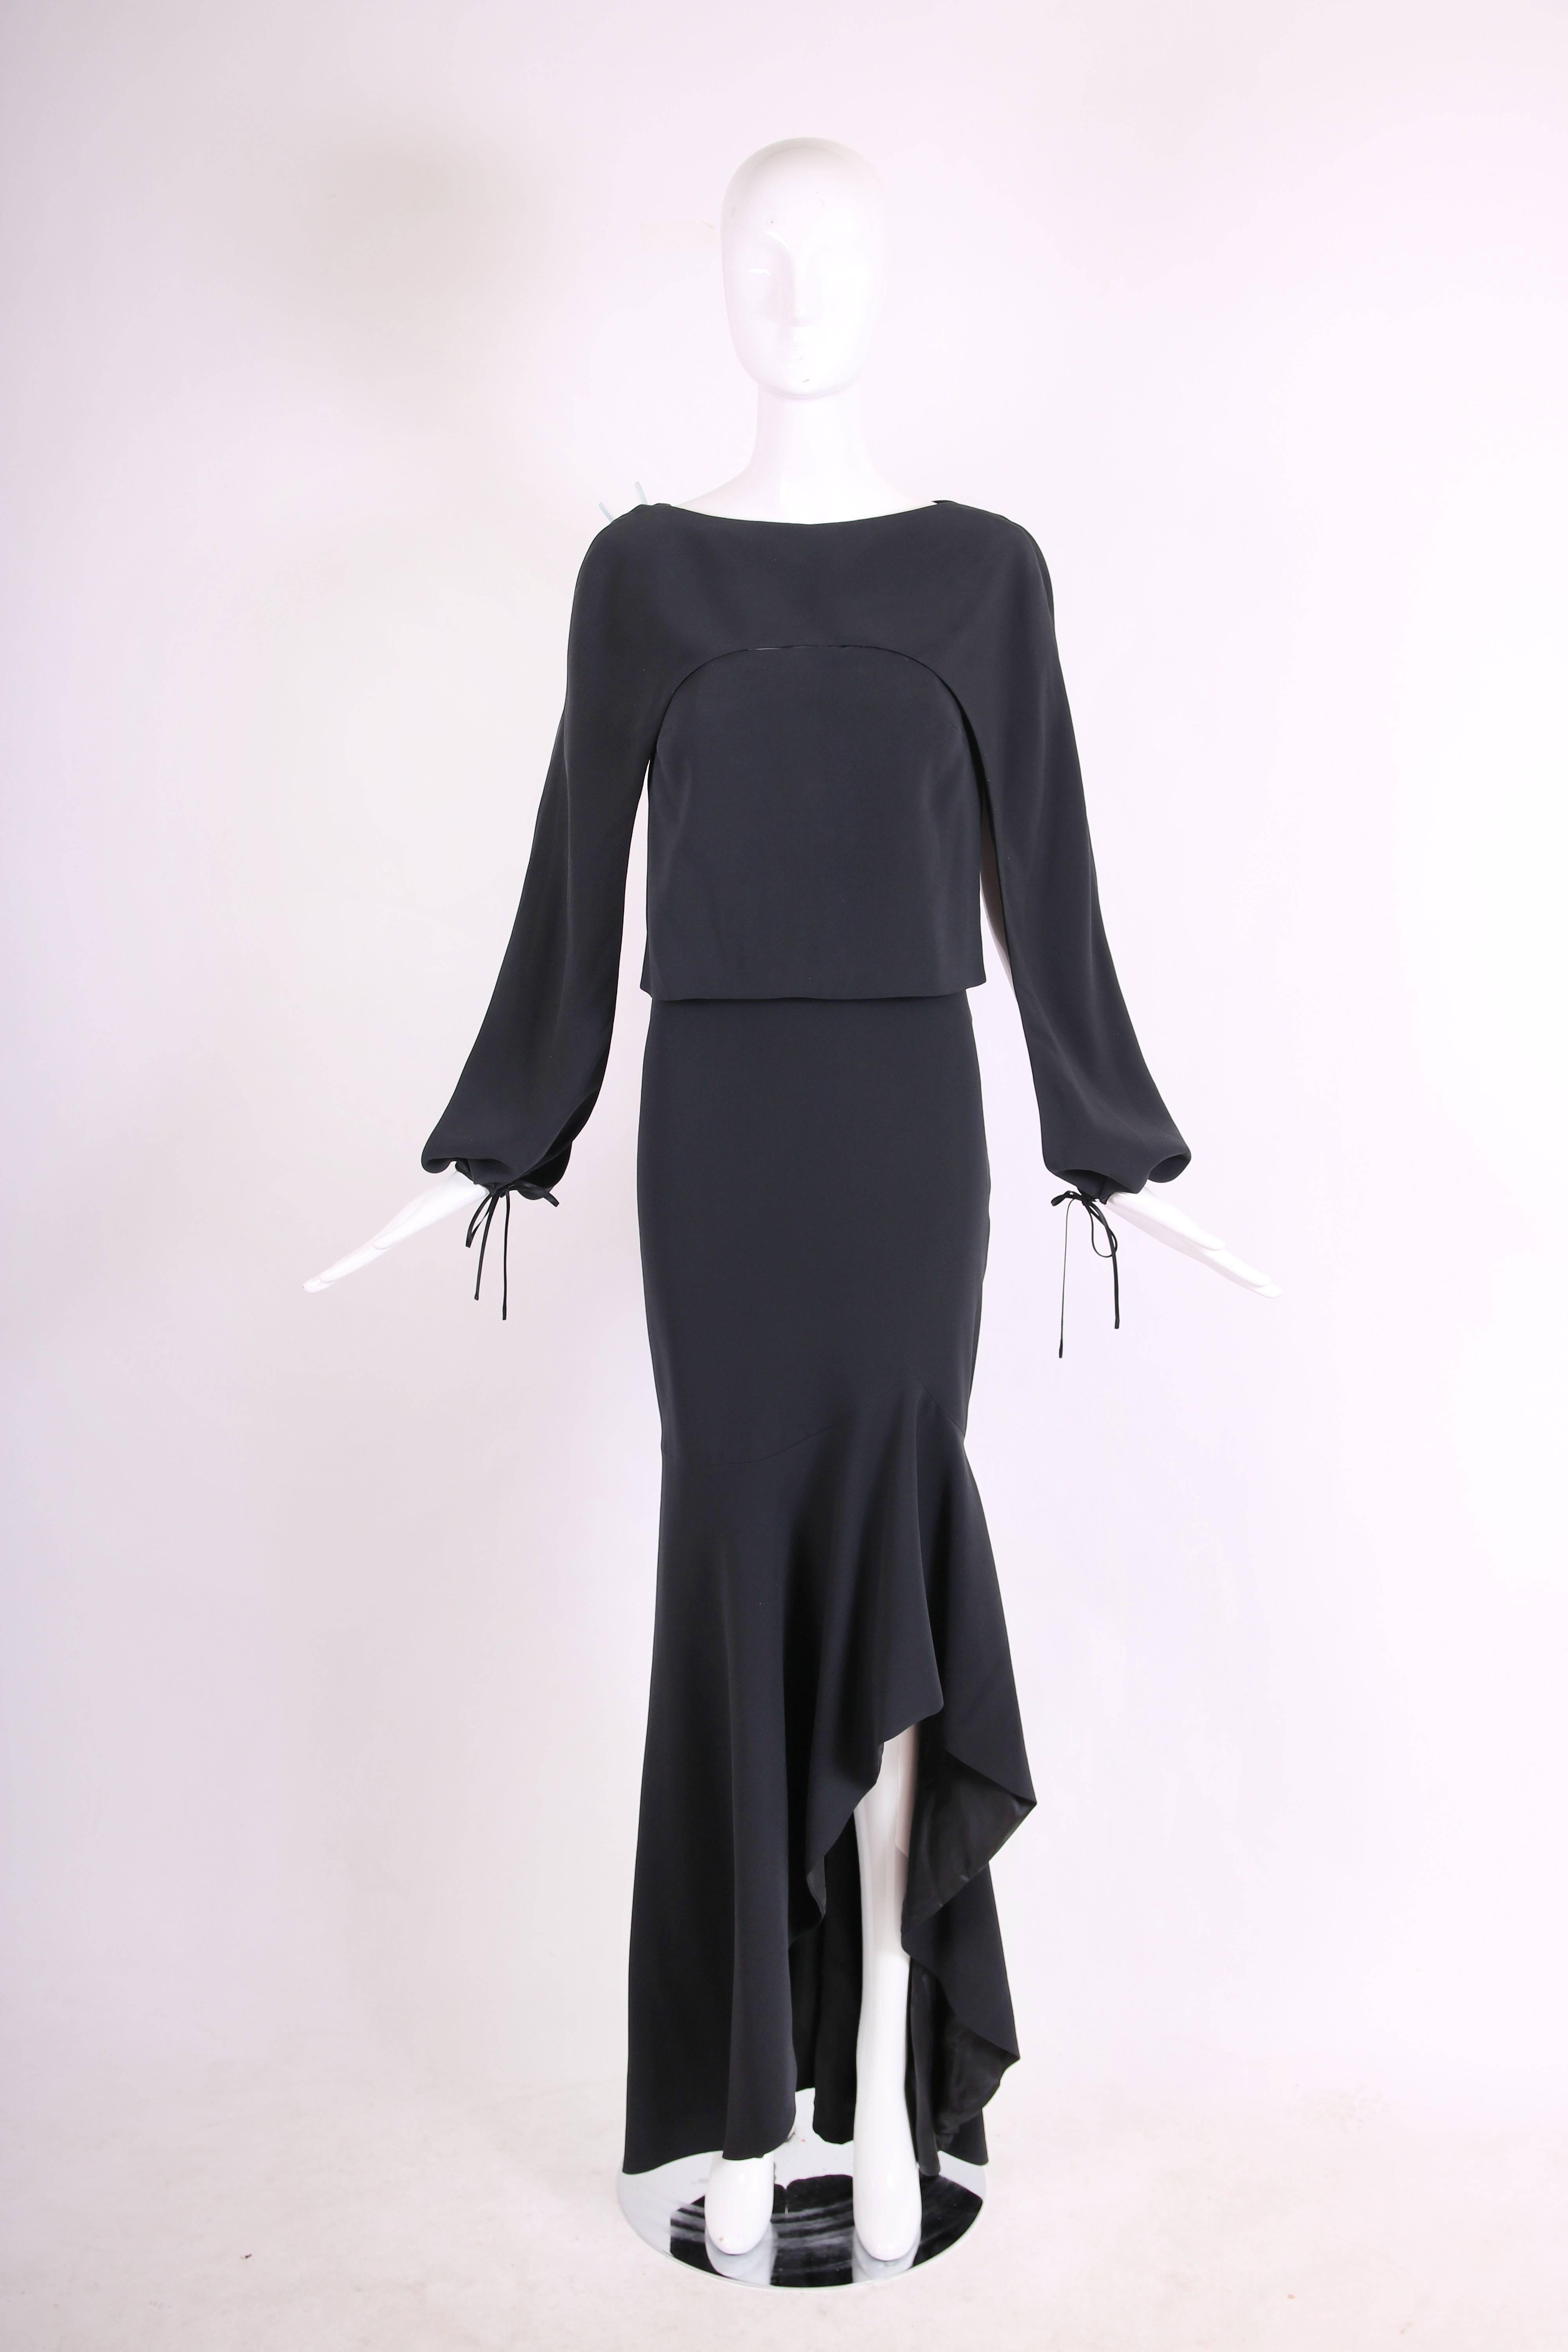 Women's Tom Ford Black Strapless Gown with Ruffled Frontal Slit and Matching Bolero Top